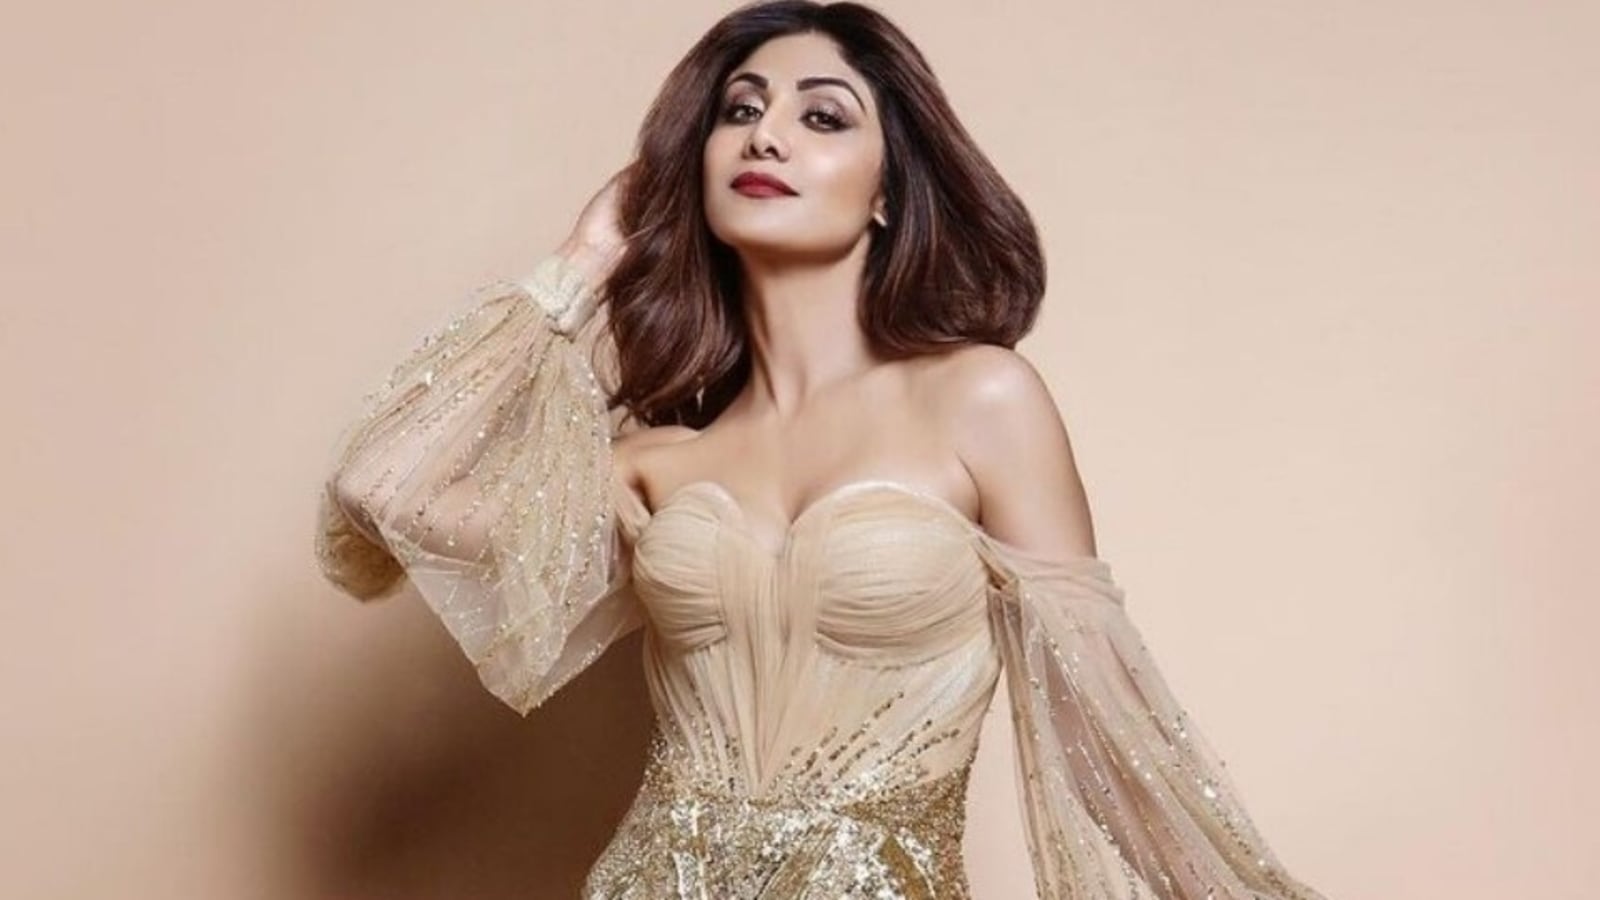 Sexy Video Full Hd Shilpa - Sparkle on, darling: Shilpa Shetty in nude shimmery gown gives us a  retro-chic moment | Fashion Trends - Hindustan Times